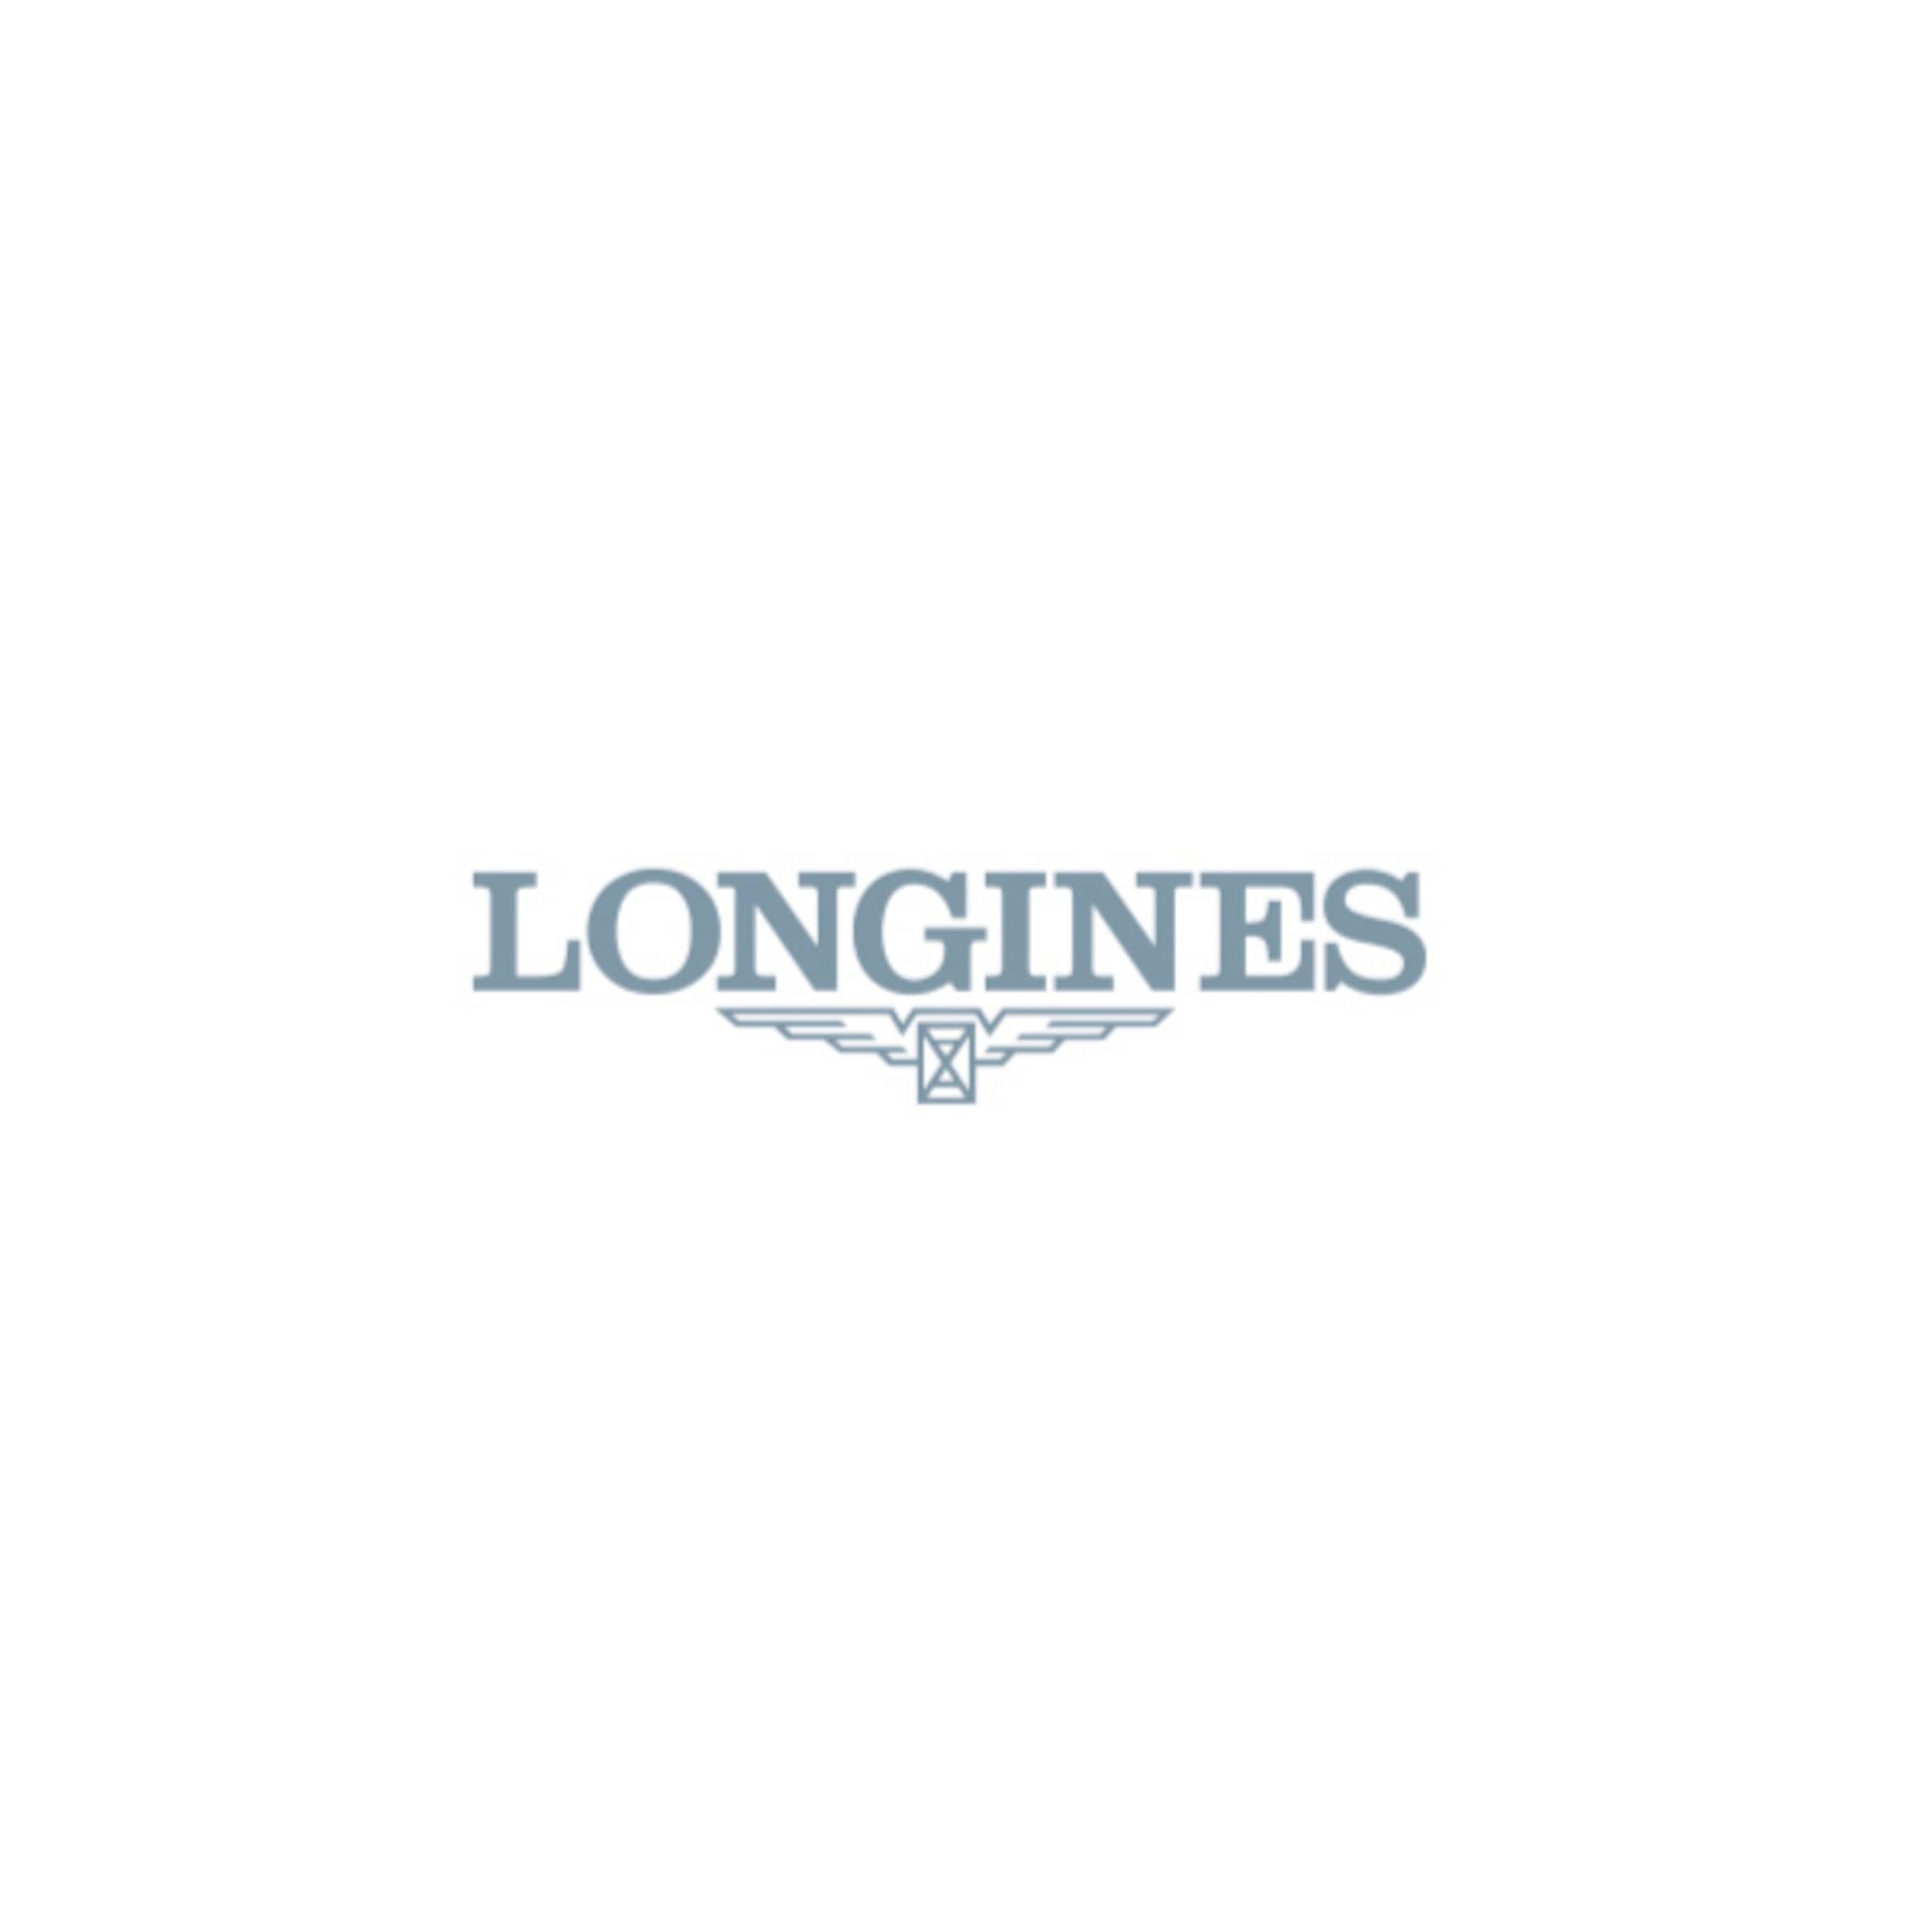 Longines THE LONGINES AVIGATION WATCH TYPE A-7 1935 Automatic Stainless steel Watch - L2.812.4.53.2